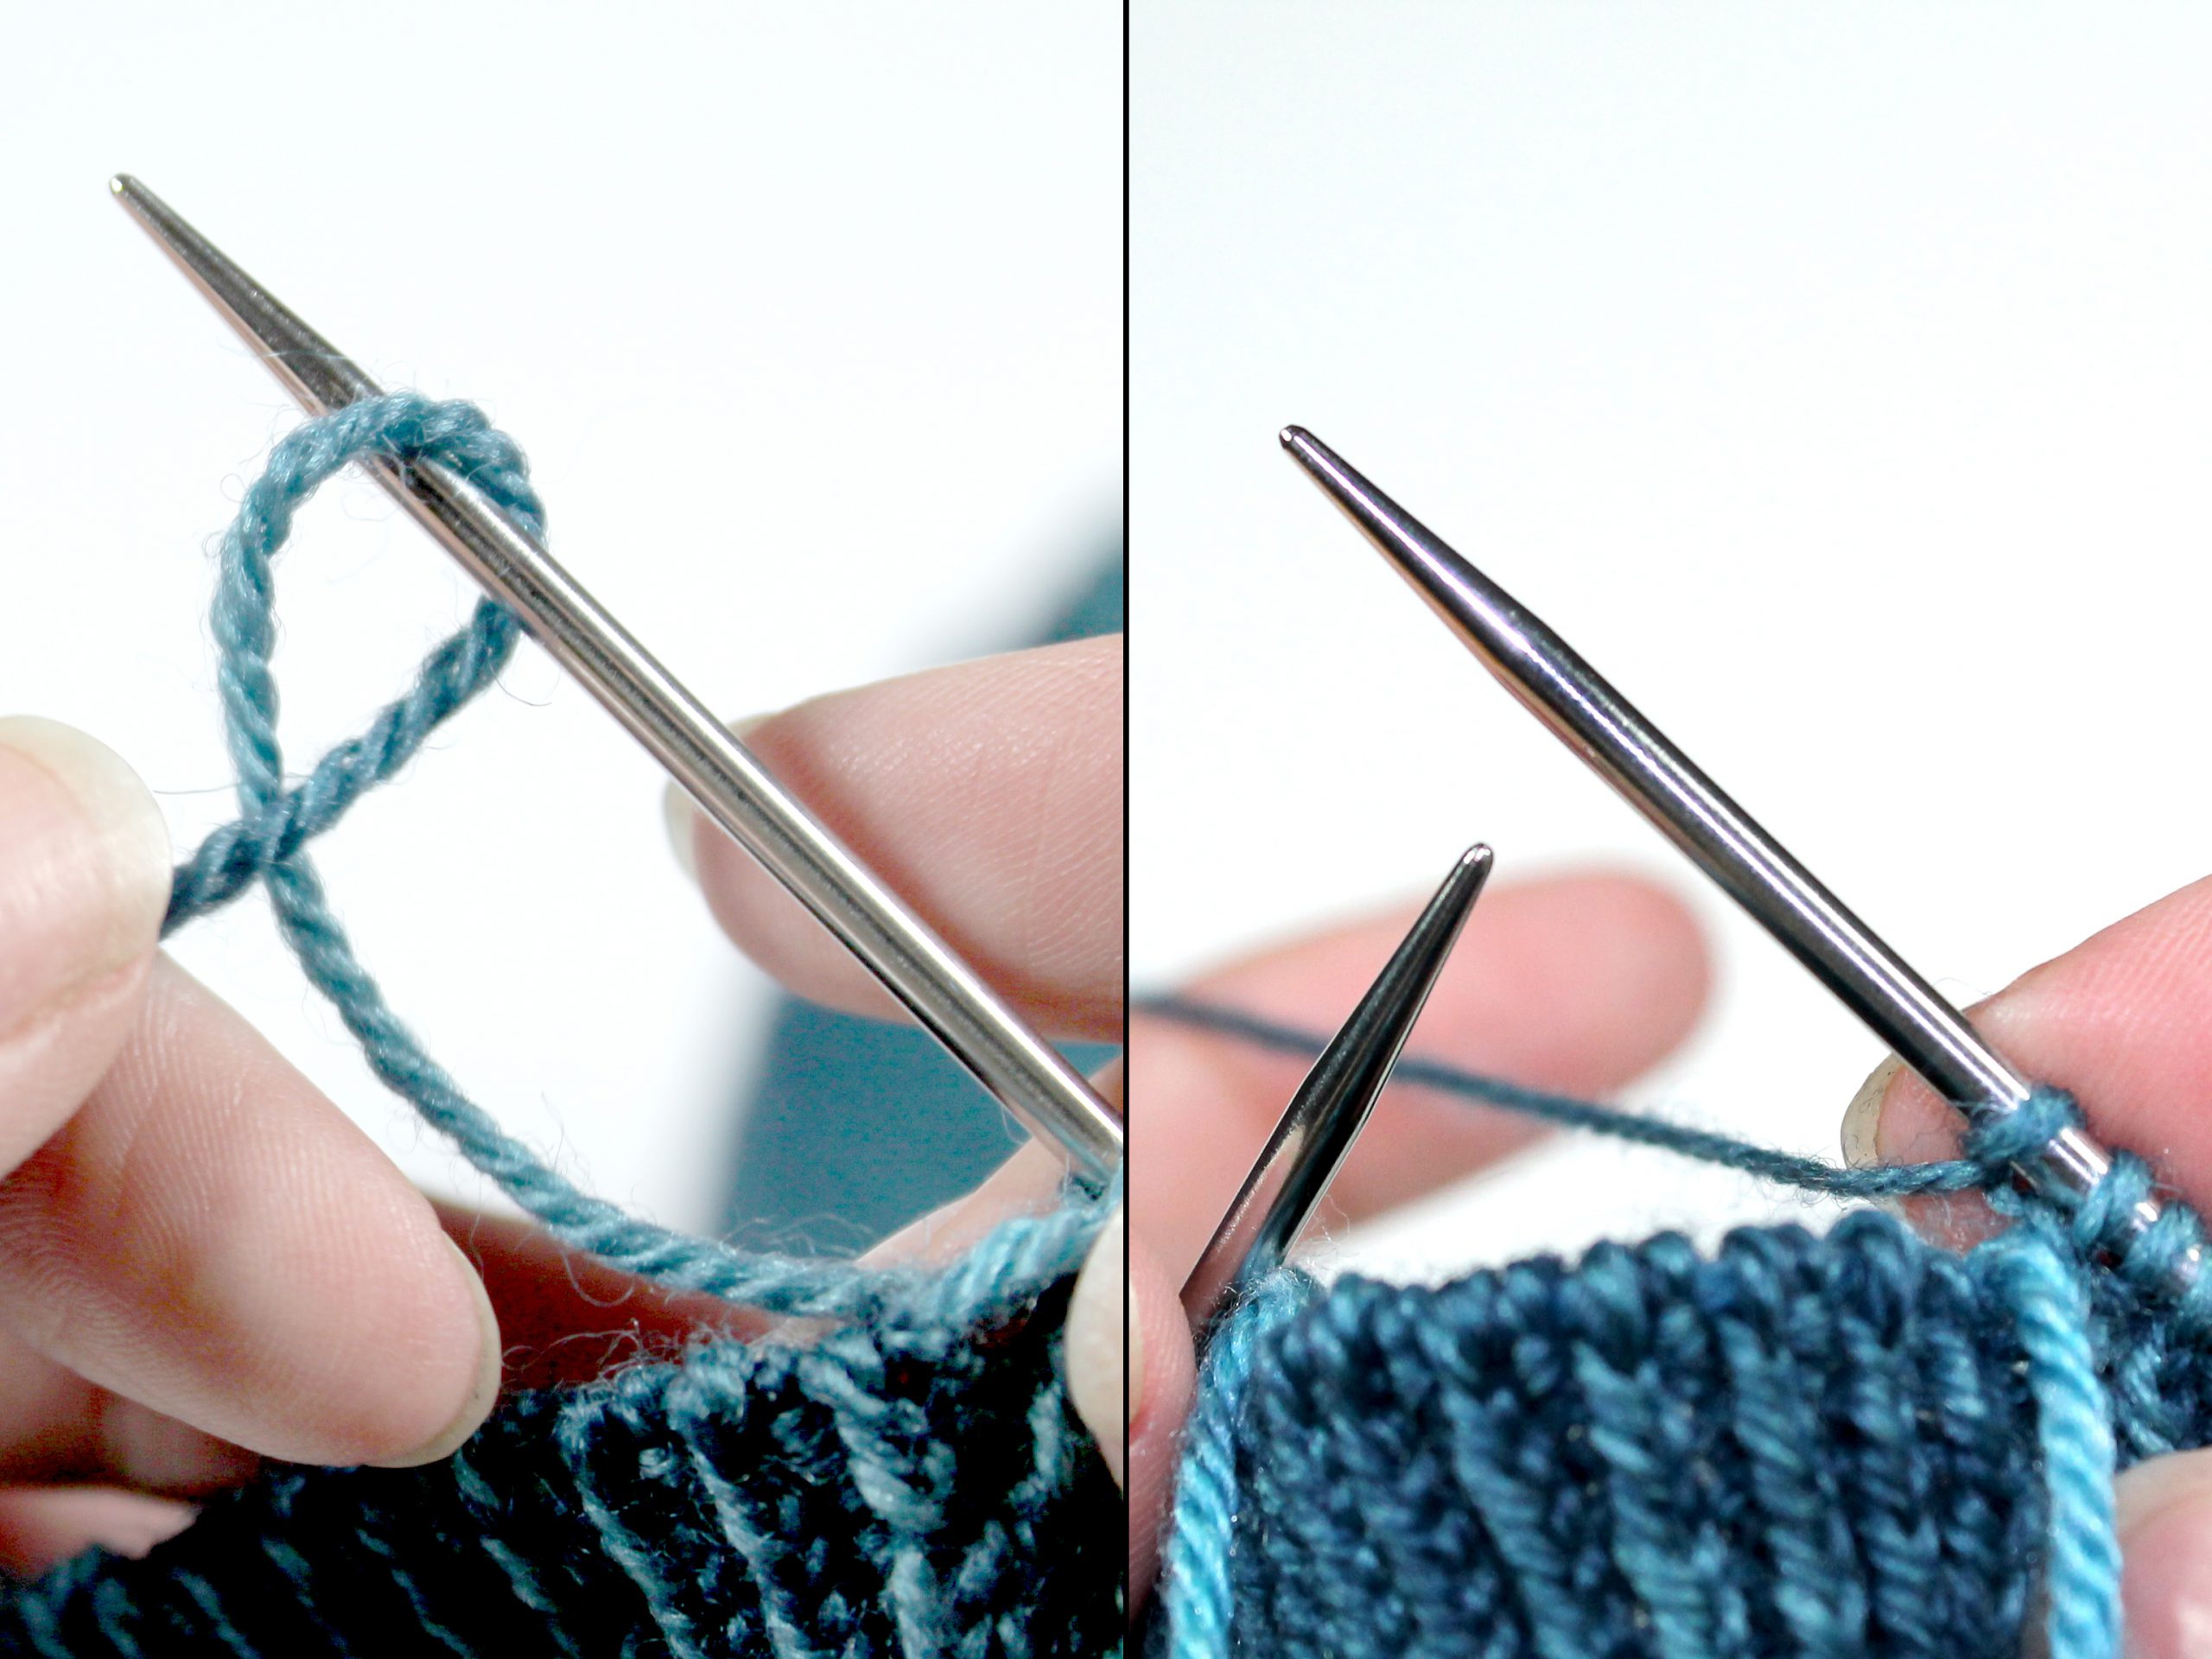 Two Images. Left Image: Yarn has been made into a loop with the yarn coming from the project under the working yarn tail. This loop has been placed on to the needle loosely. Right Image: The cast-on stitch has been pulled tight.